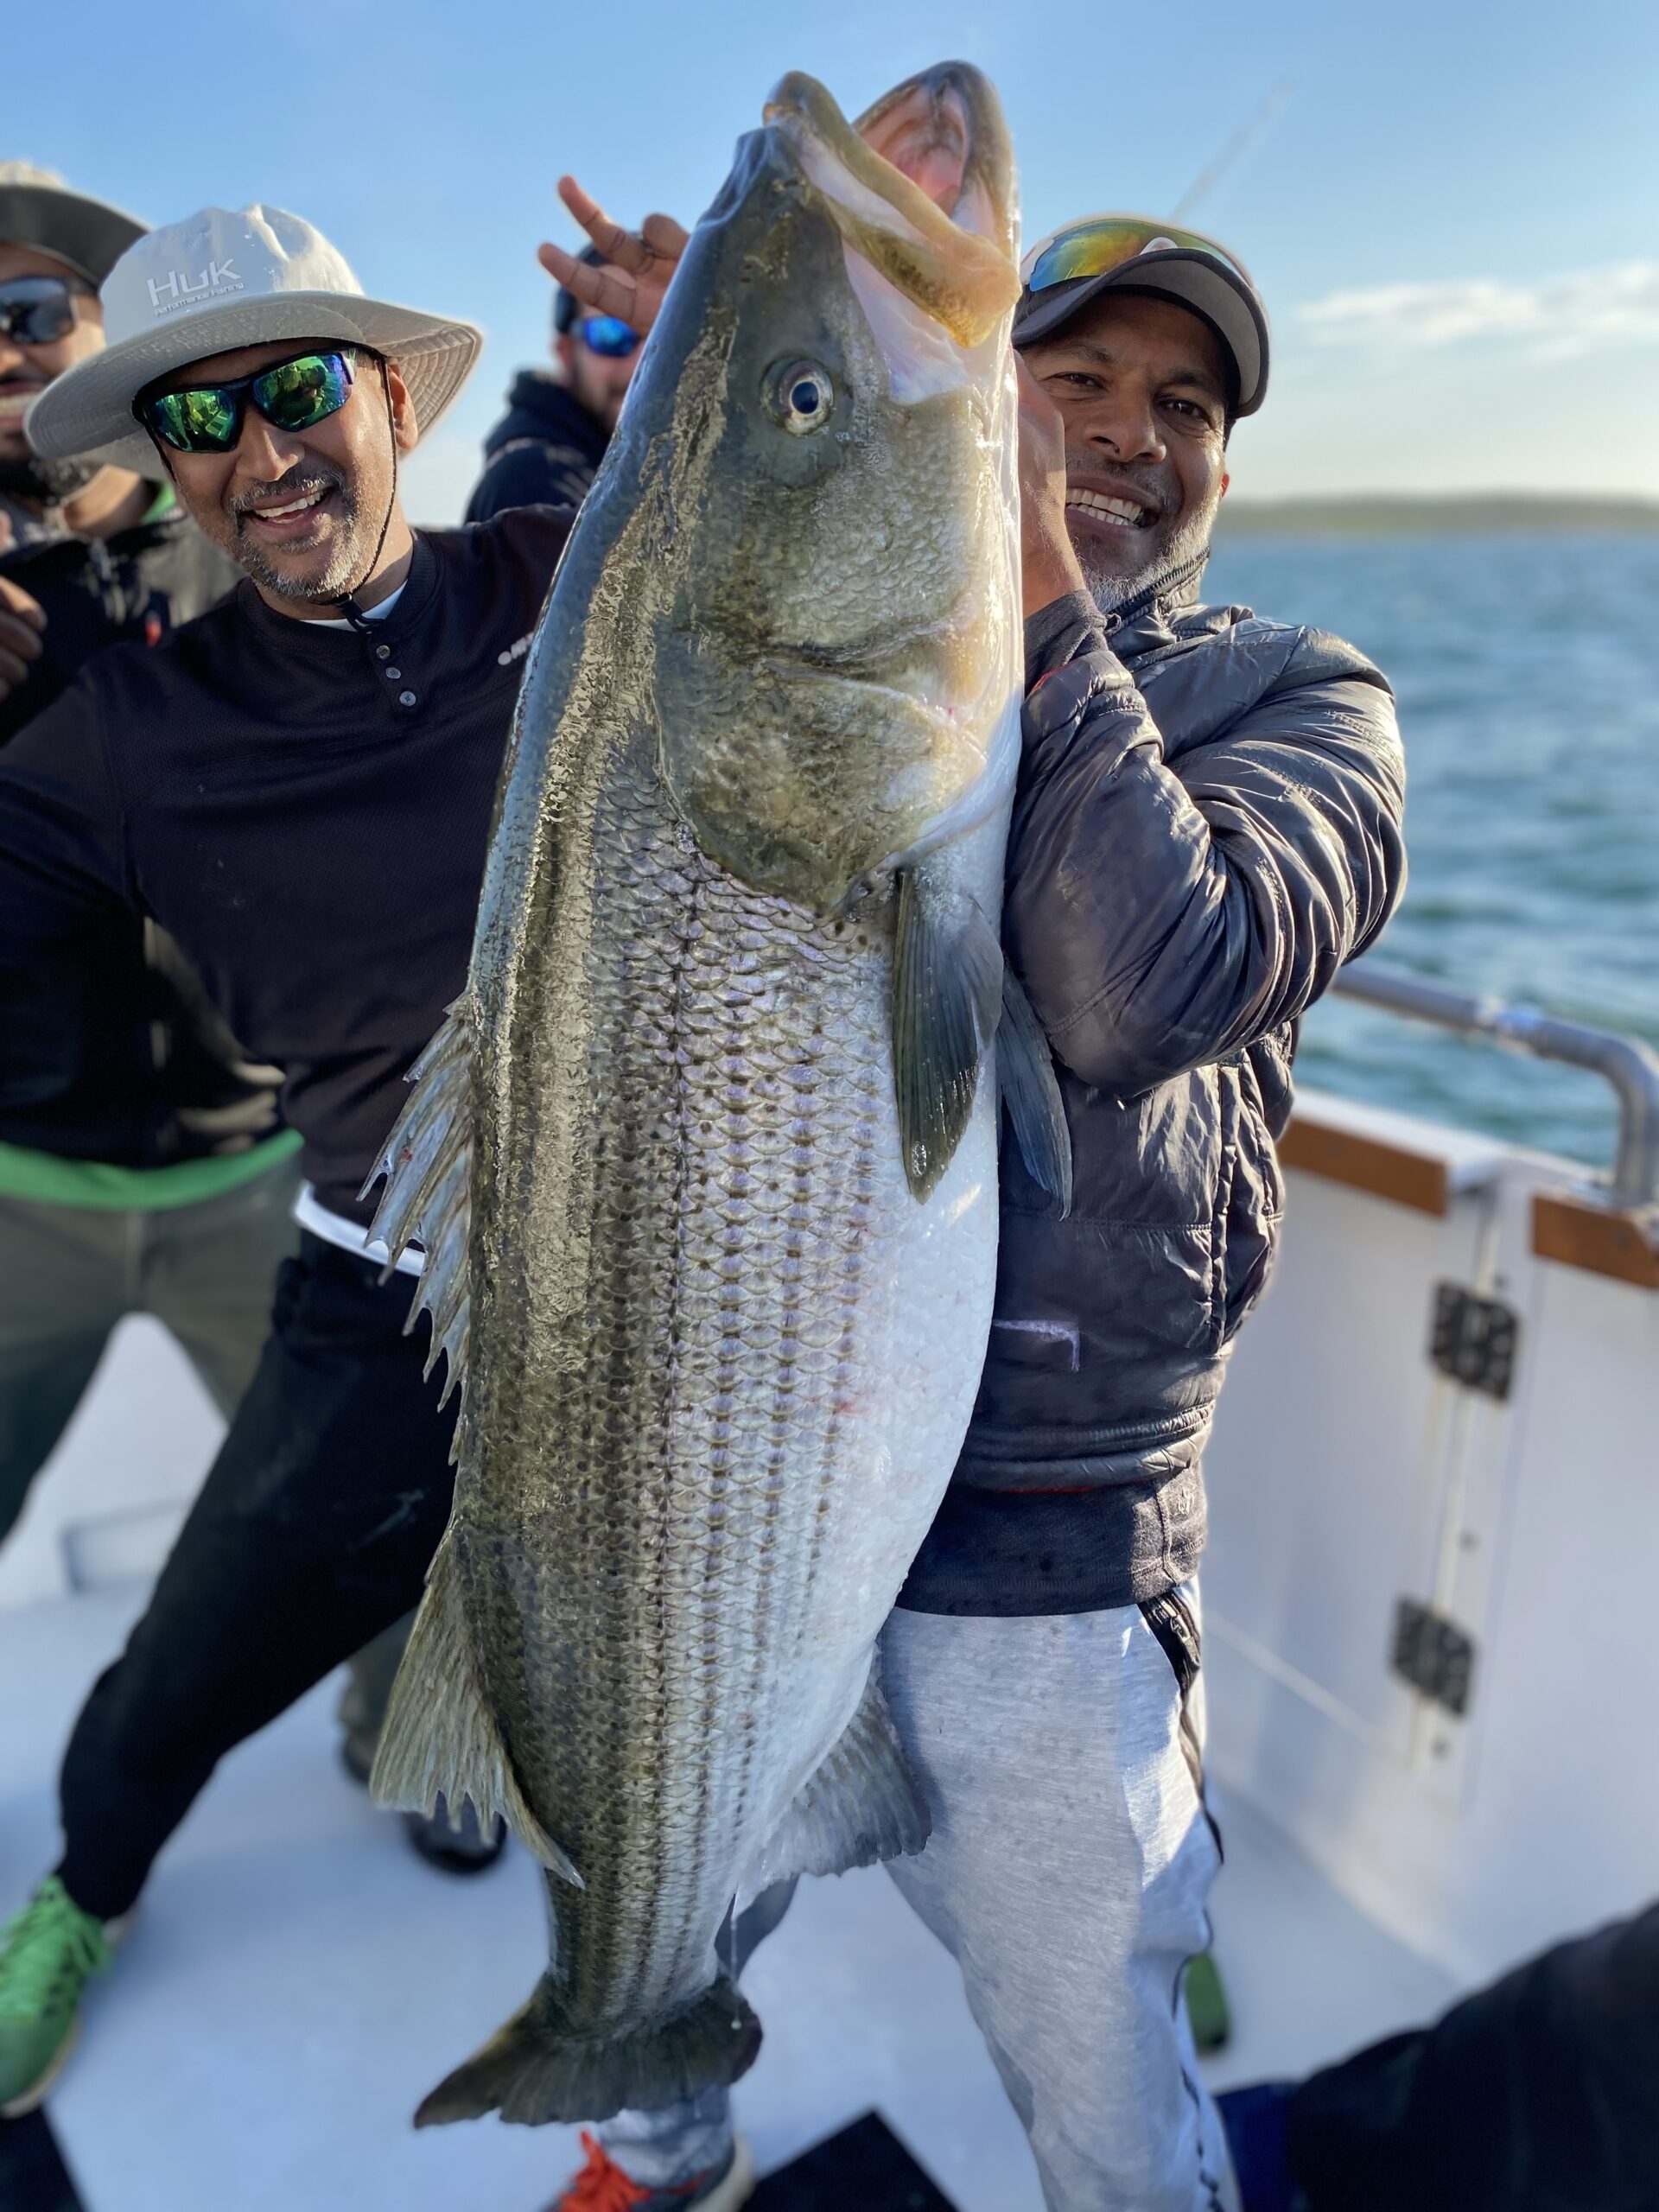 Another warm winter in the Northeast (okay, yes, it's cold today...) does not bode well for the spawning hopes for this spring of big striped bass, like this 56-pounder that was caught and released by anglers aboard the Hammer Time charter boat out of Montauk last summer. 
Capt. Tommy LaSala